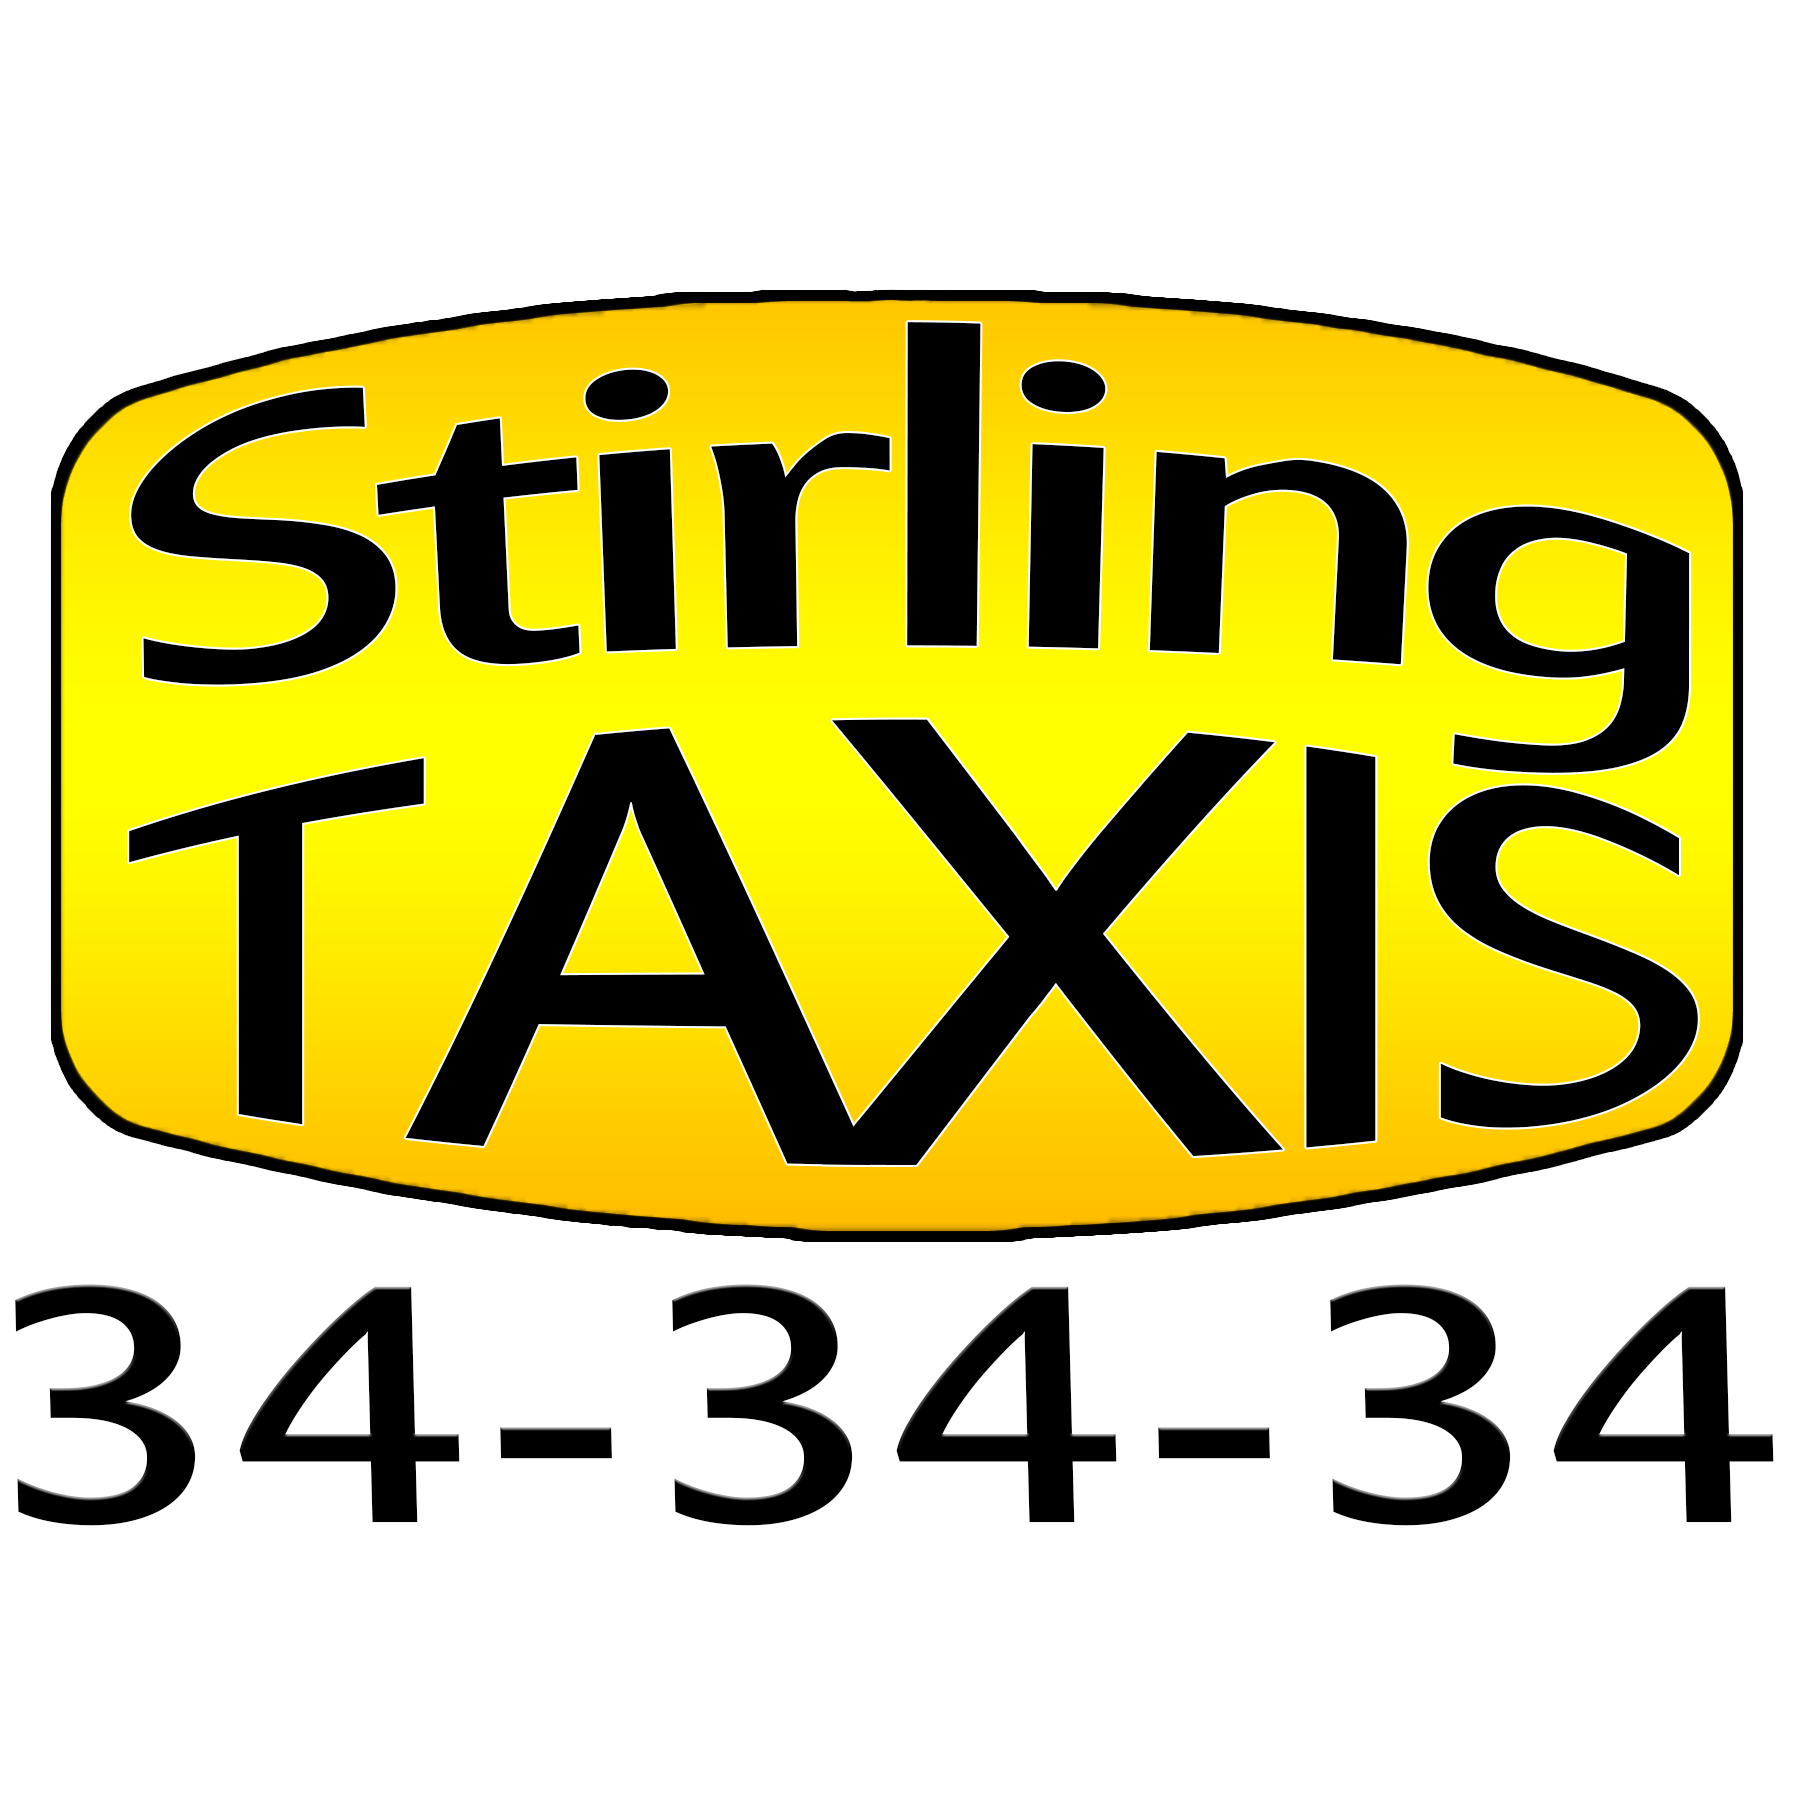 Stirling-taxi-square-logo